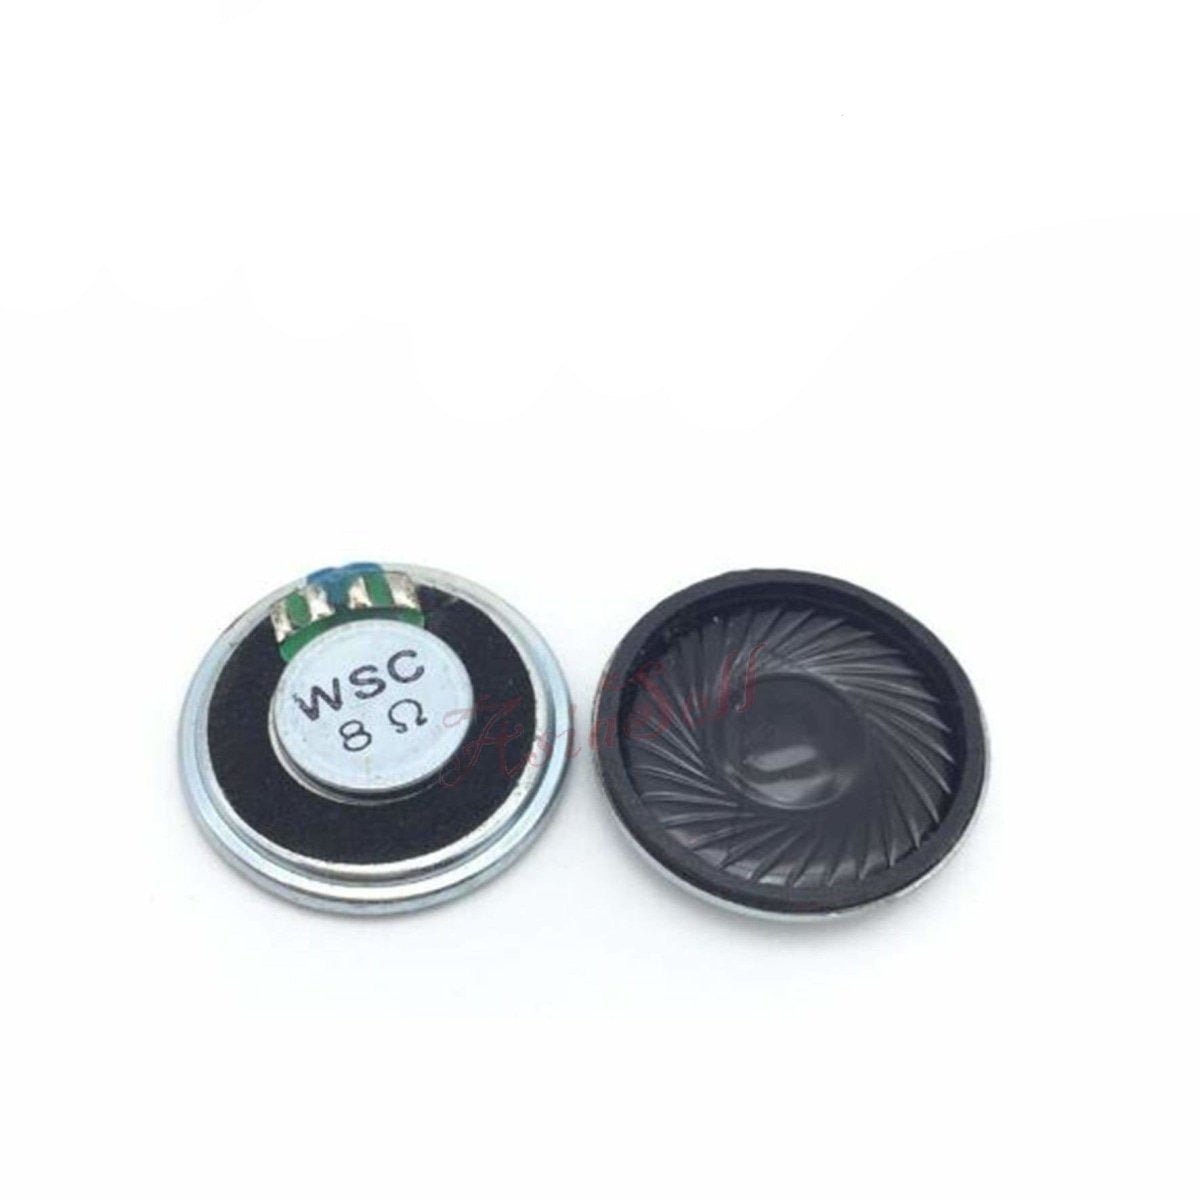 2pcs Speaker Horn 0.25-3W 4-32ohm Ultra Thin Horns Speakers - 3W 4R 40mm Trumpet - - Asia Sell